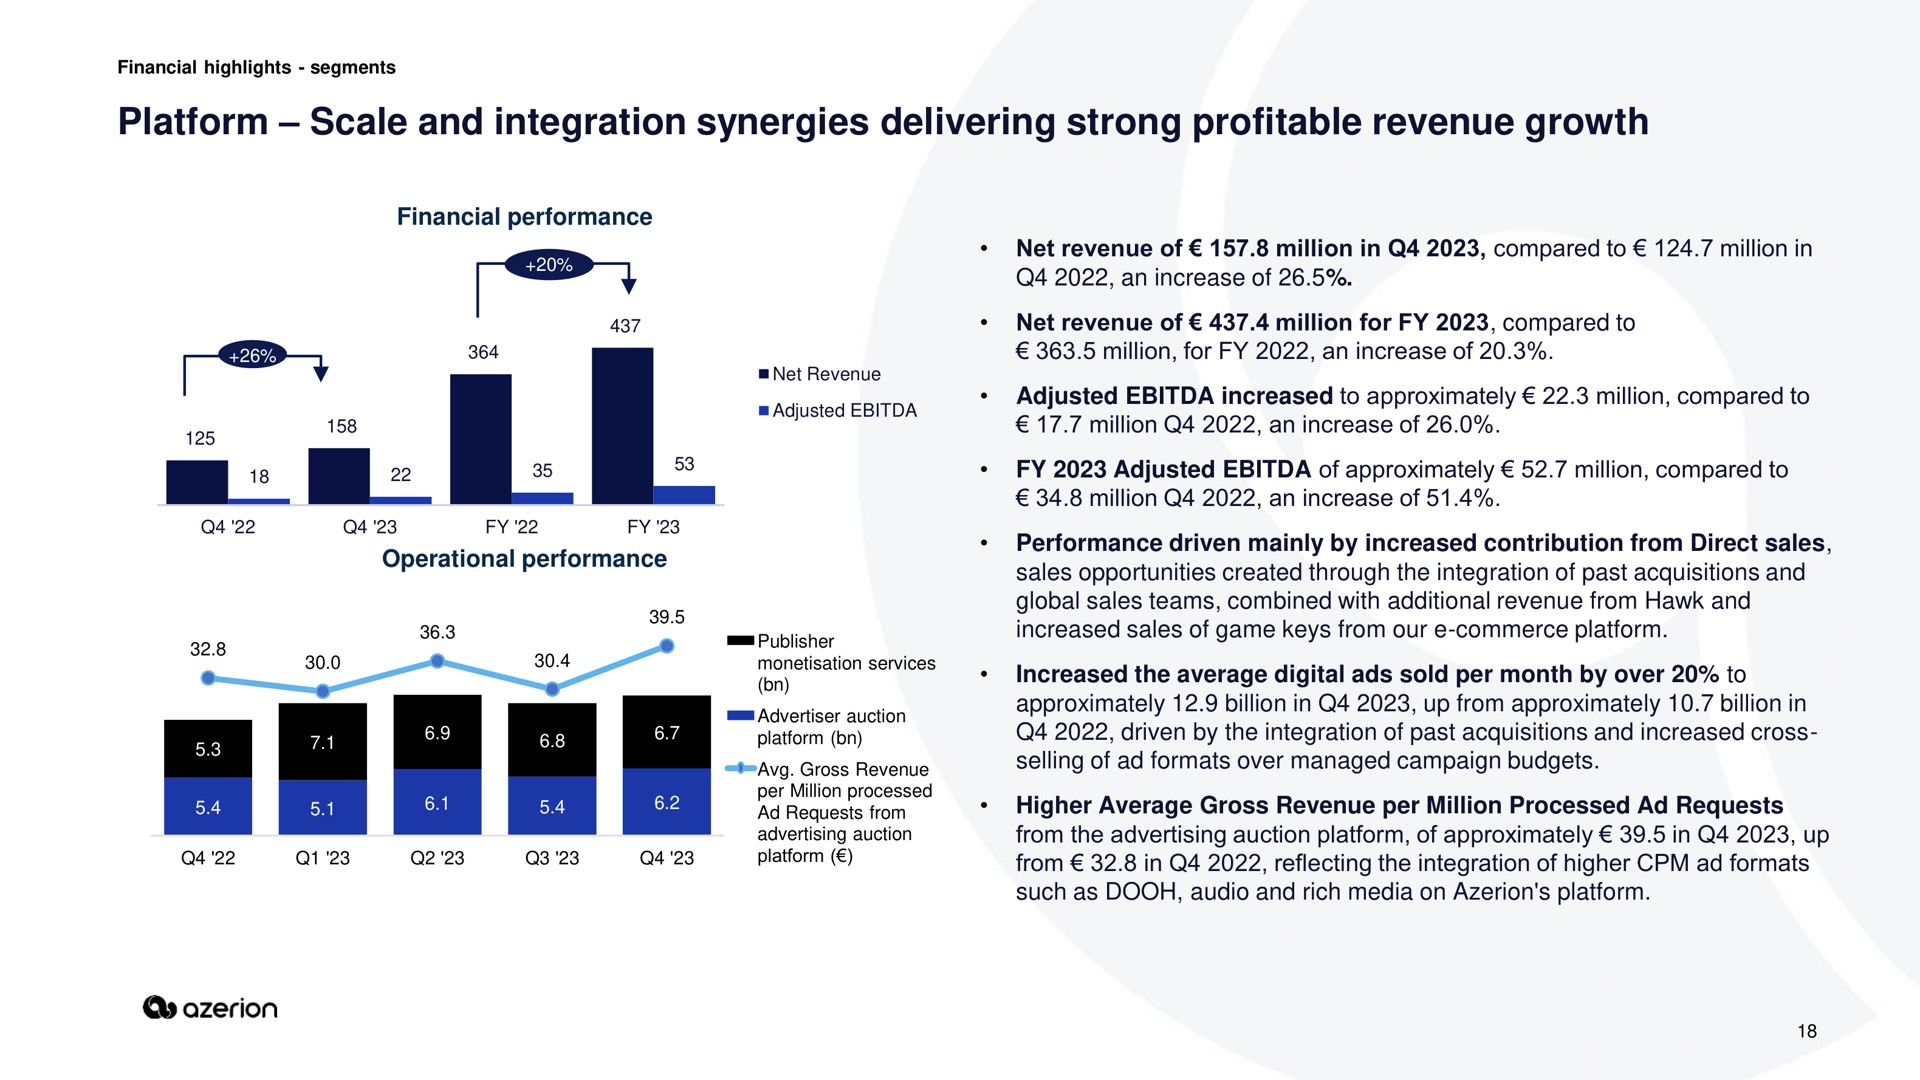 platform scale and integration synergies delivering strong profitable revenue growth | Azerion